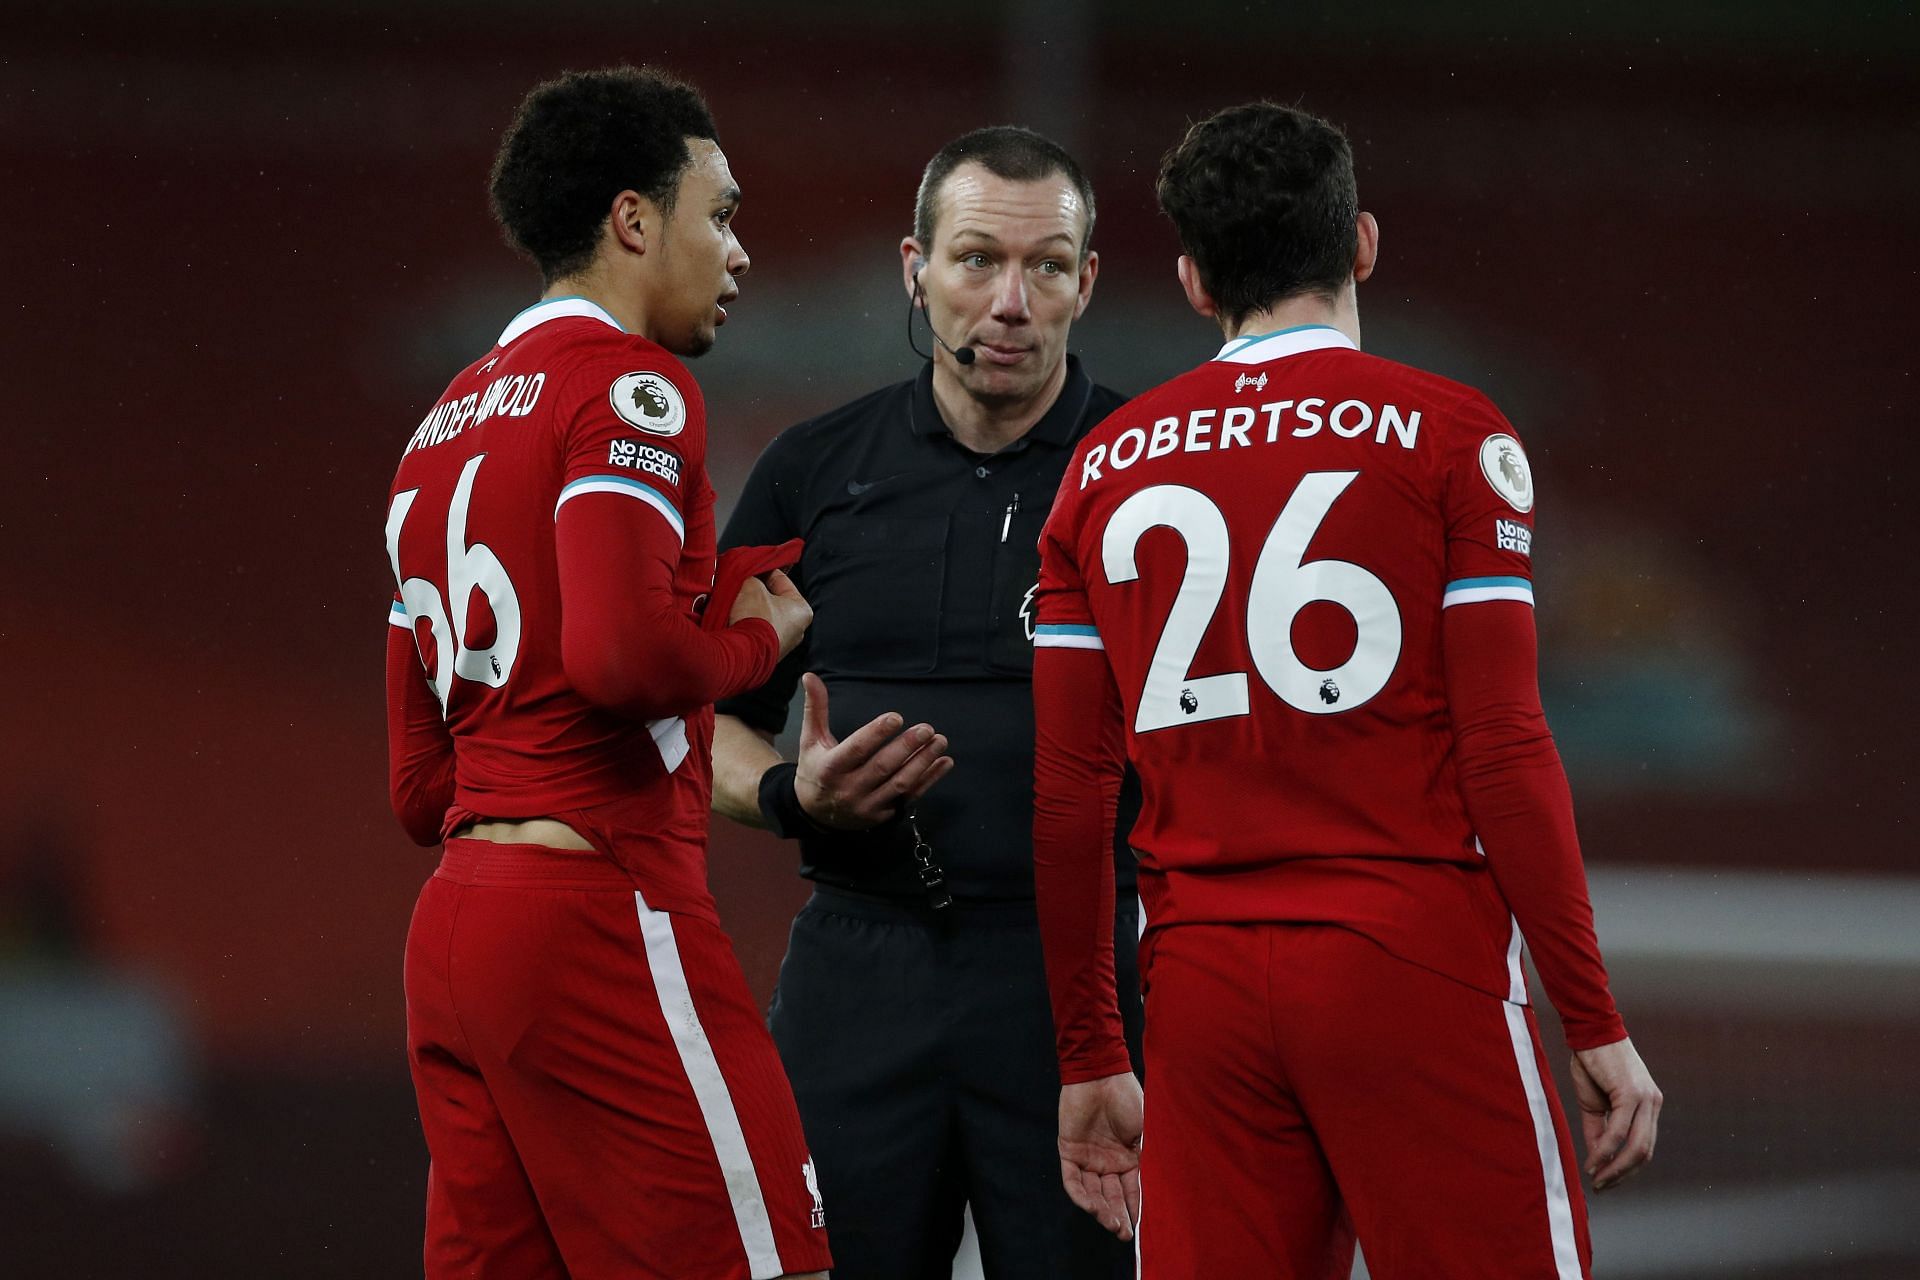 Alexander-Arnold and Robertson have been vital for the Reds over the years